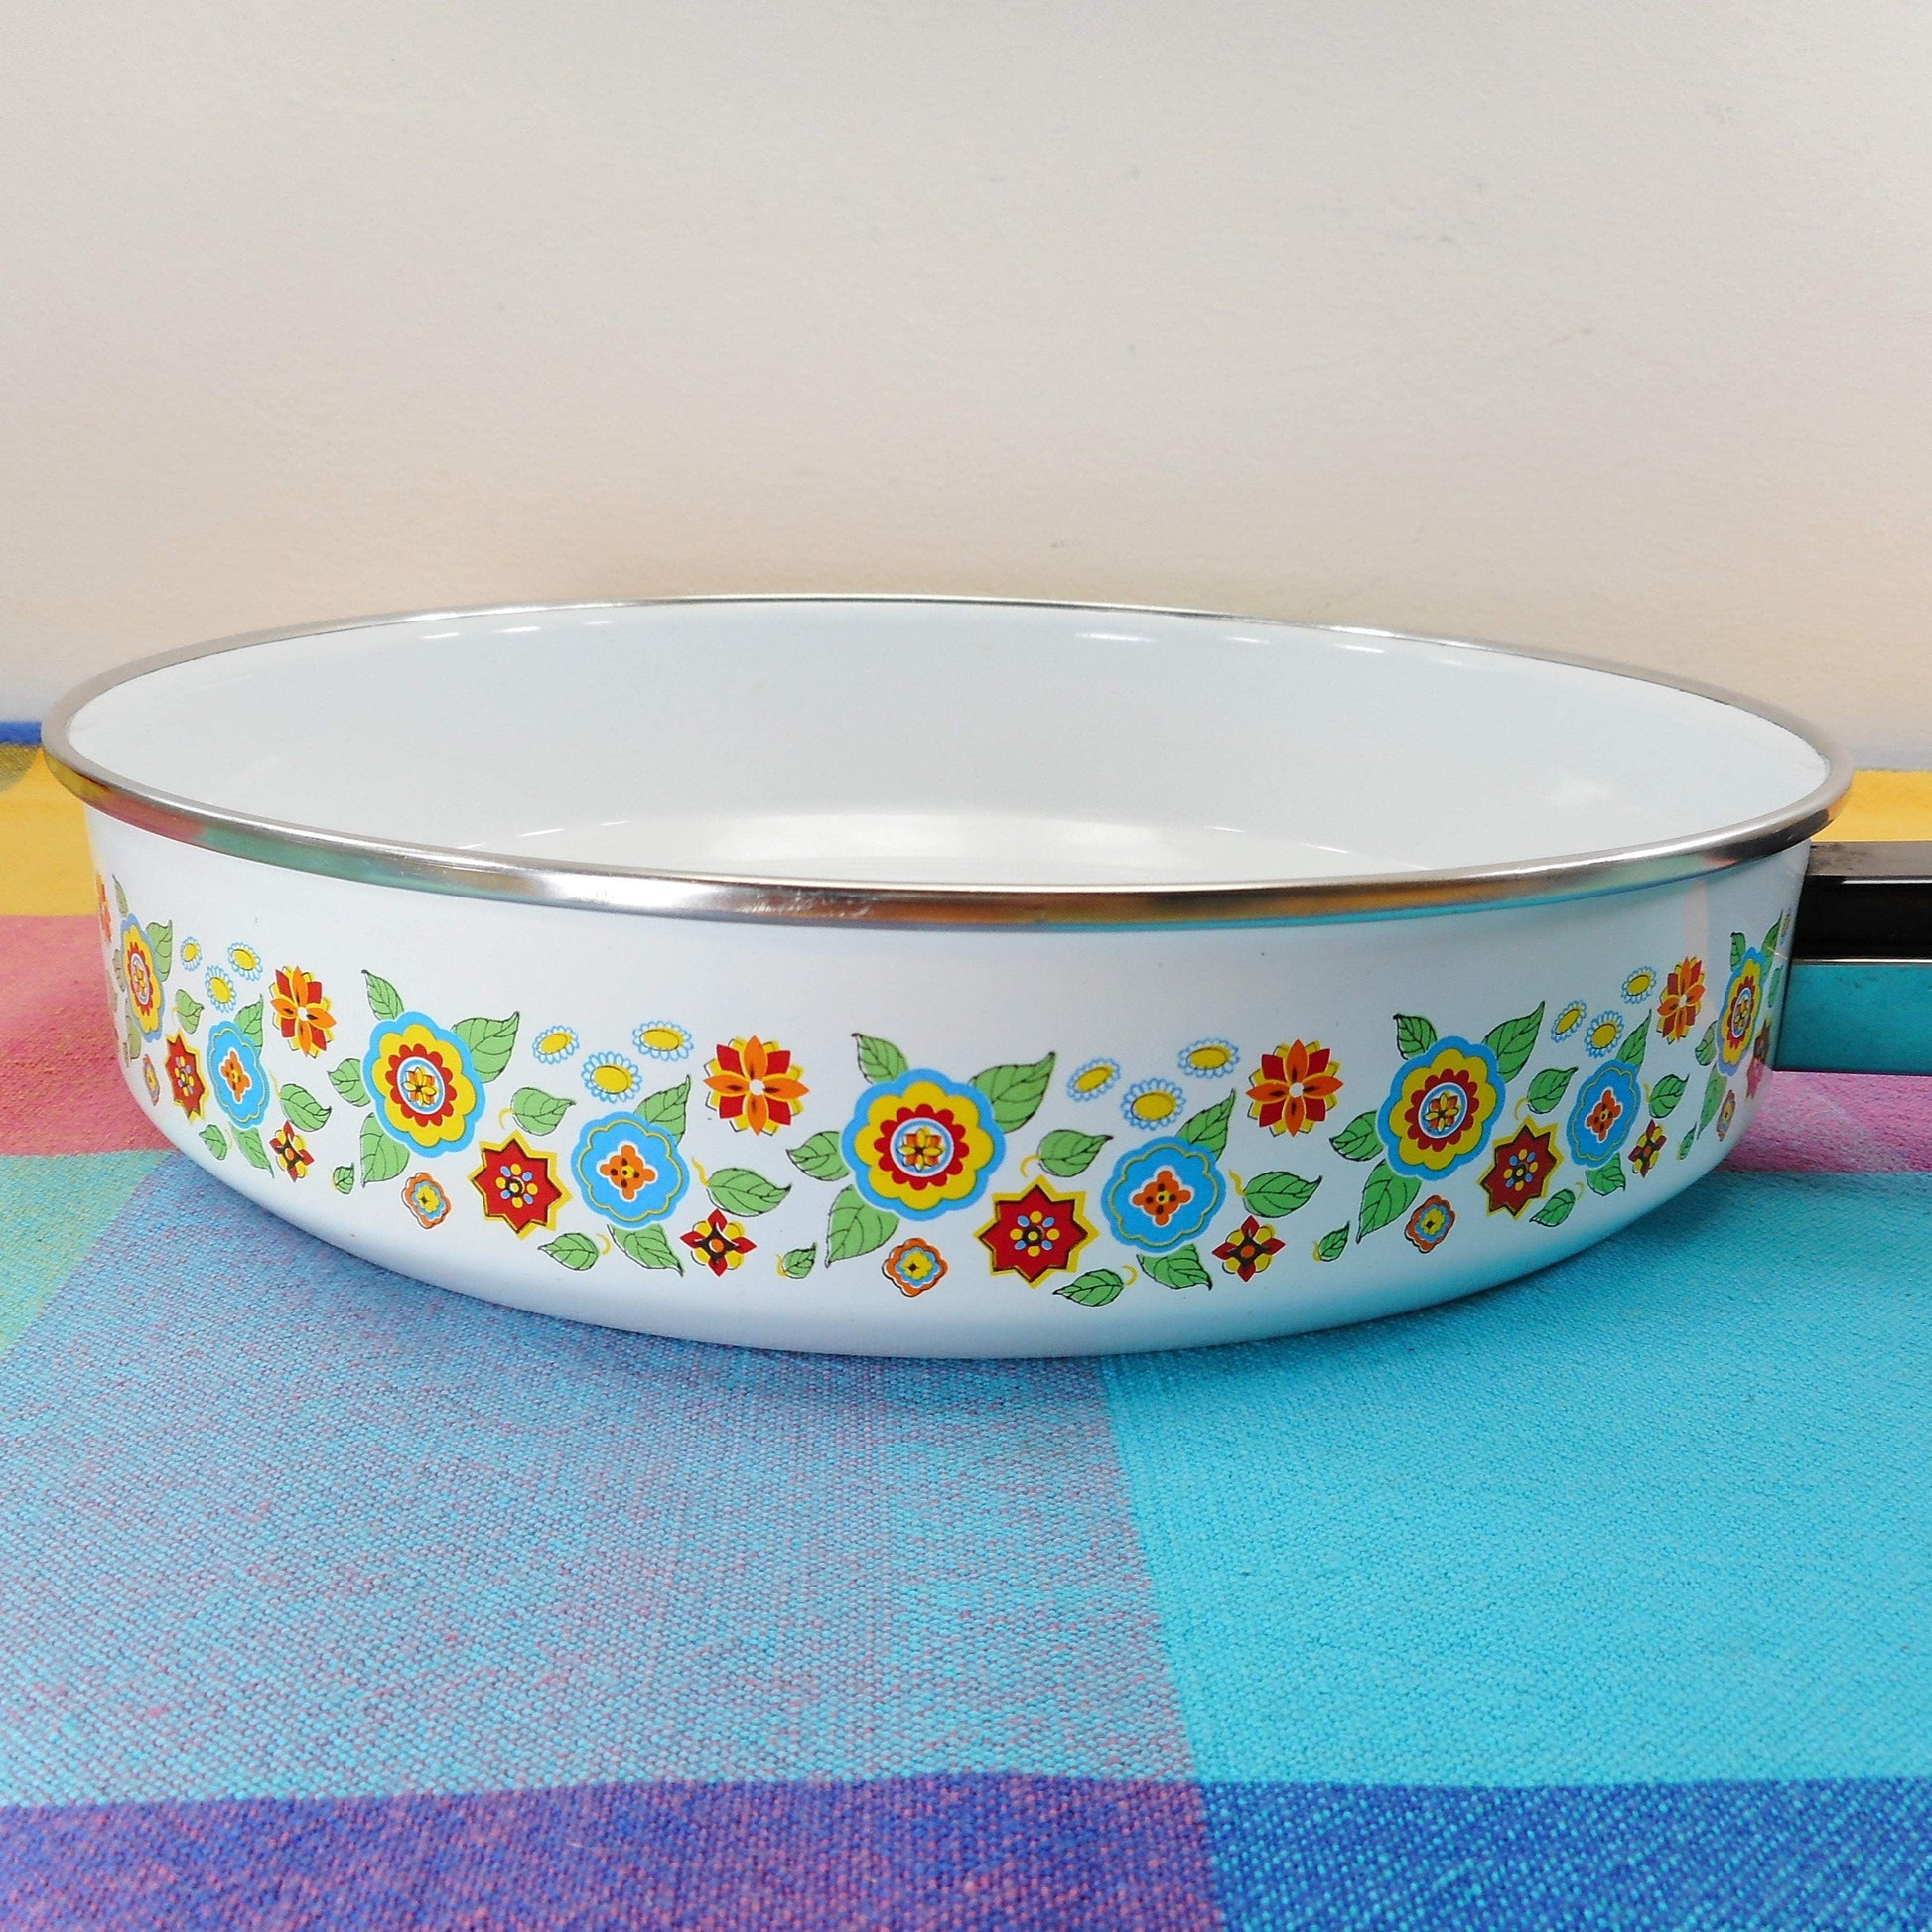 Austria Email Enamelware Cookware 10" Skillet - Mod Mid Century Flowers